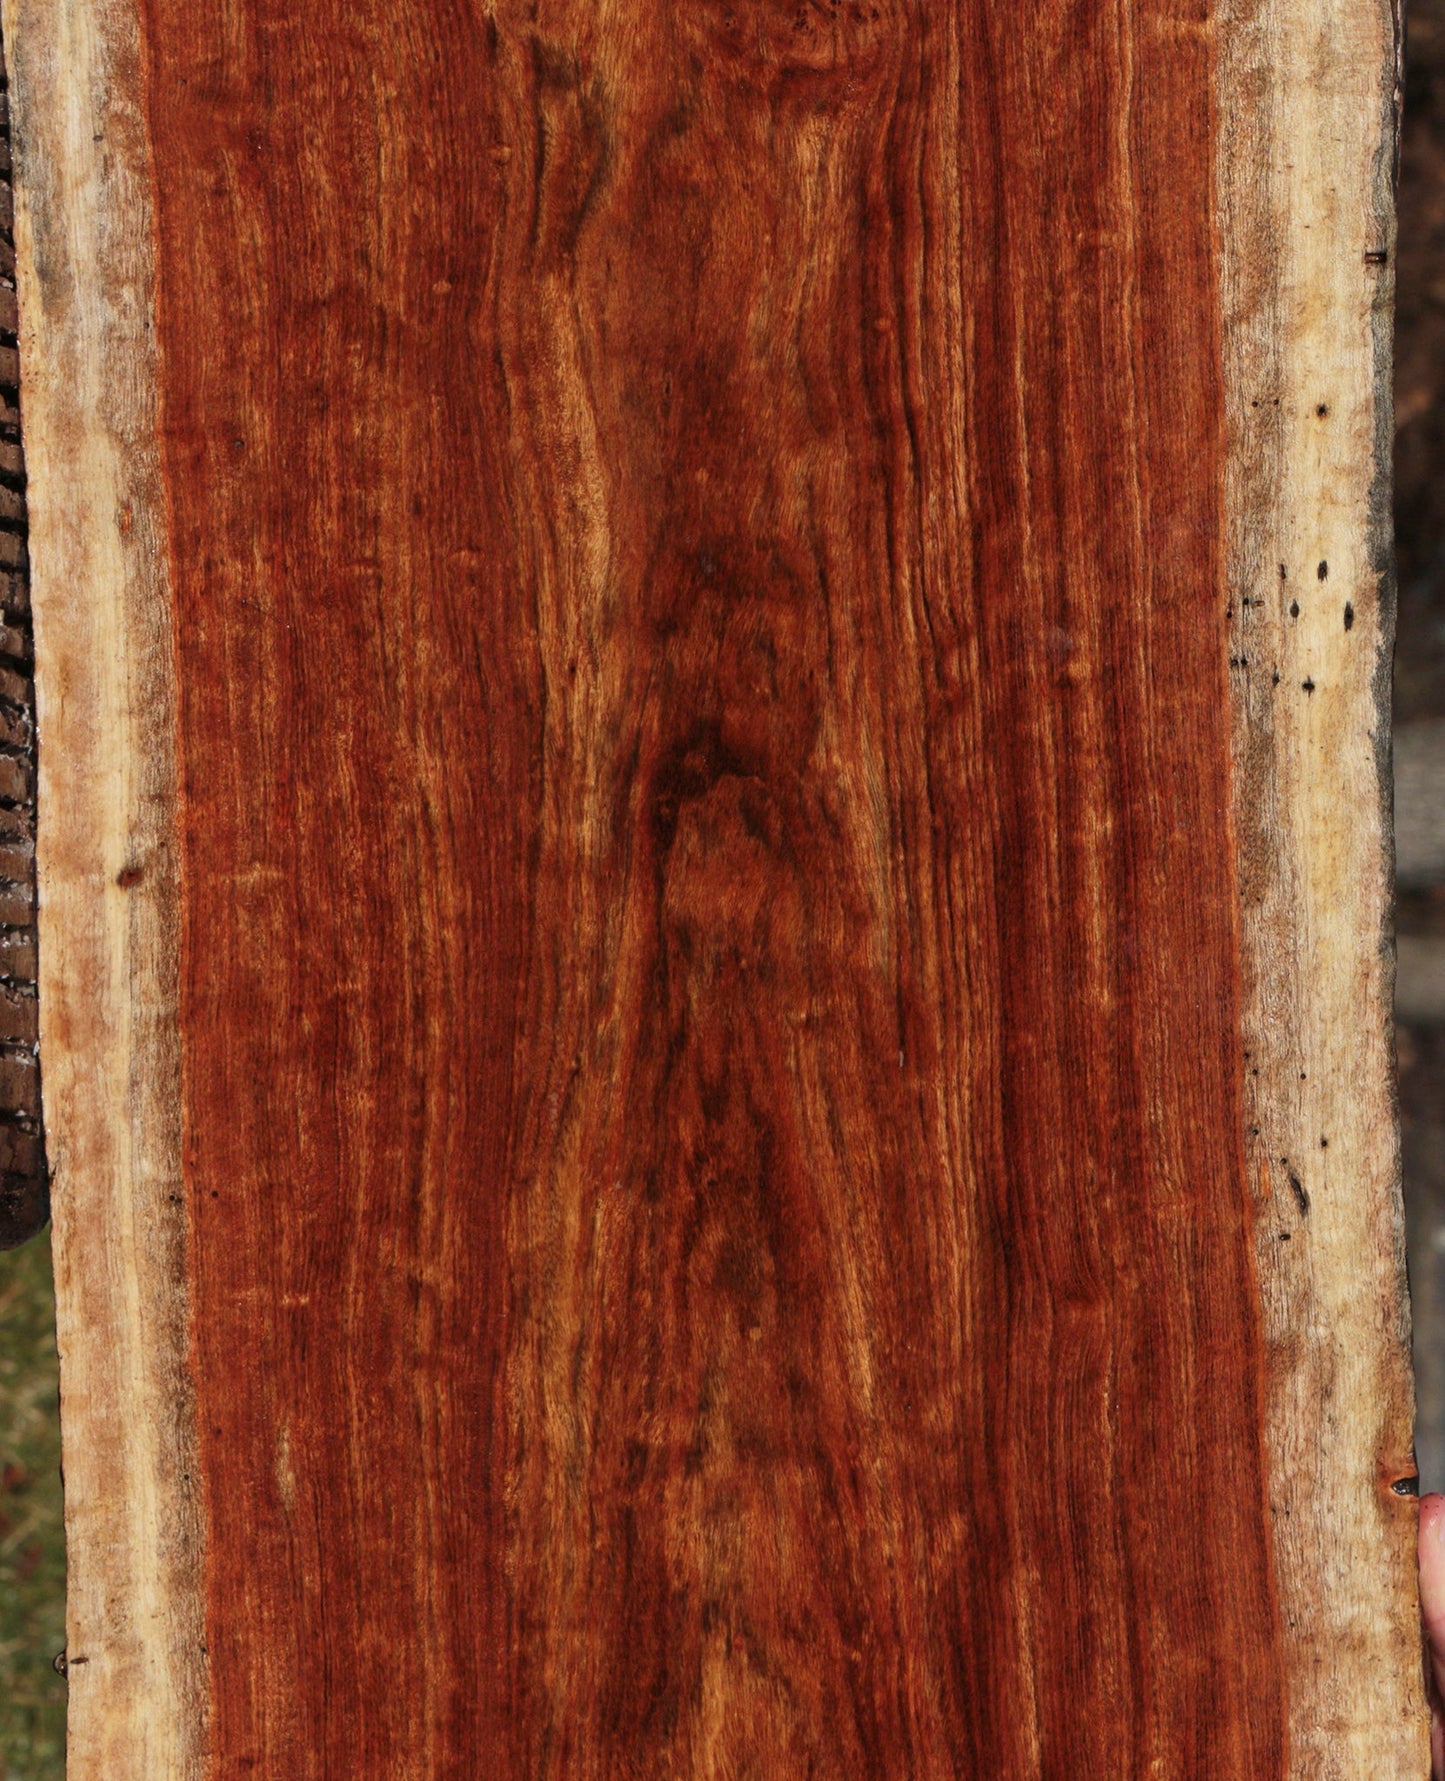 Extra Fancy Chechen Live Edge Lumber